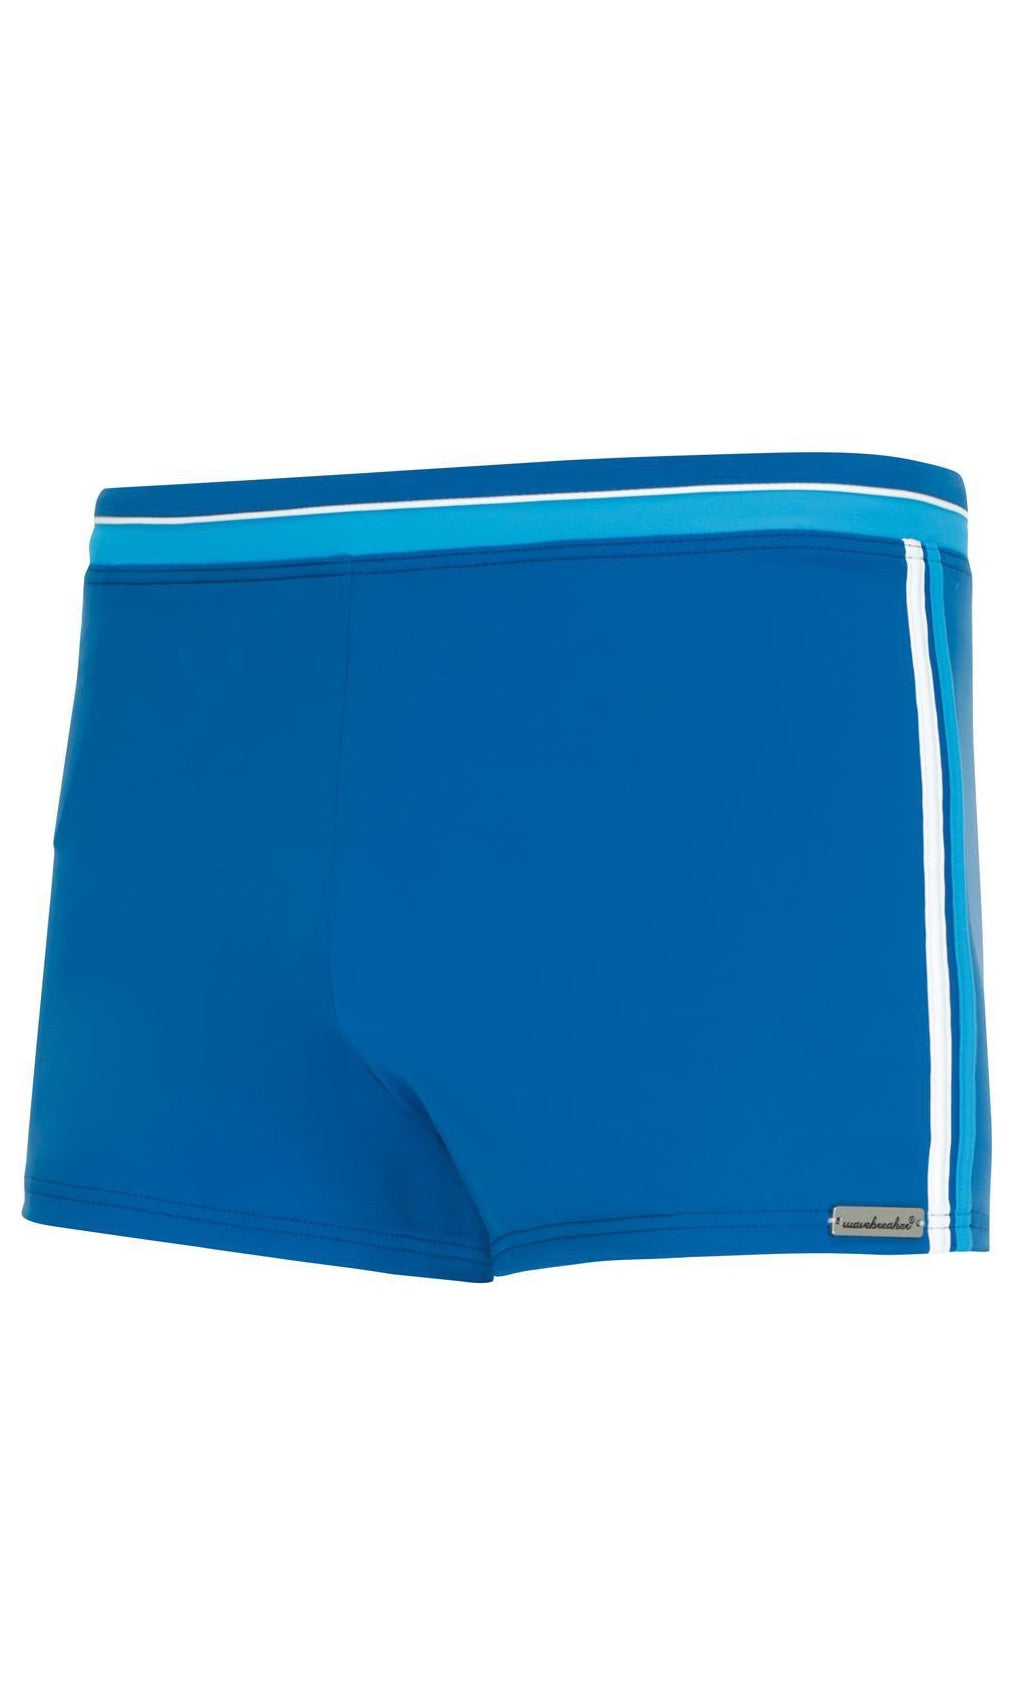 Classic Blues Trunks, More Colours, Special Order S - XL